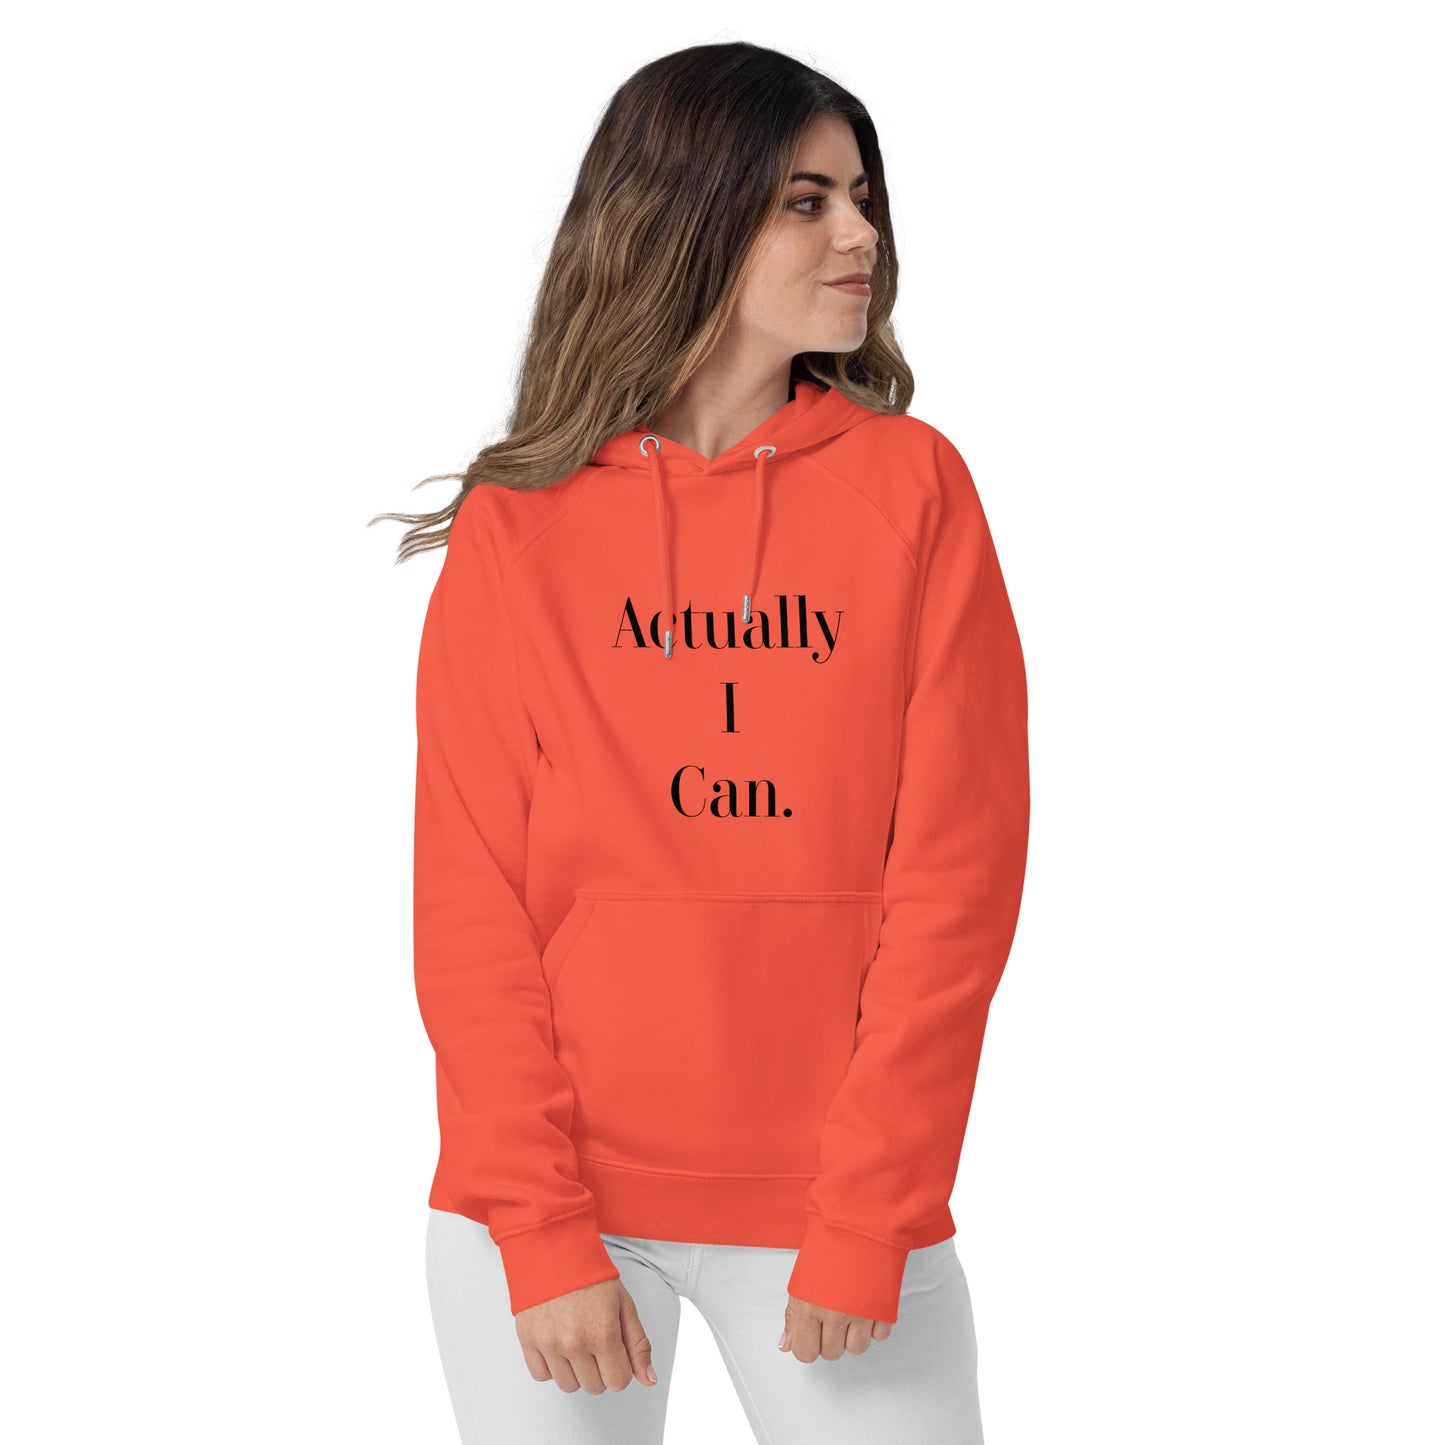 Actually I can hoodie